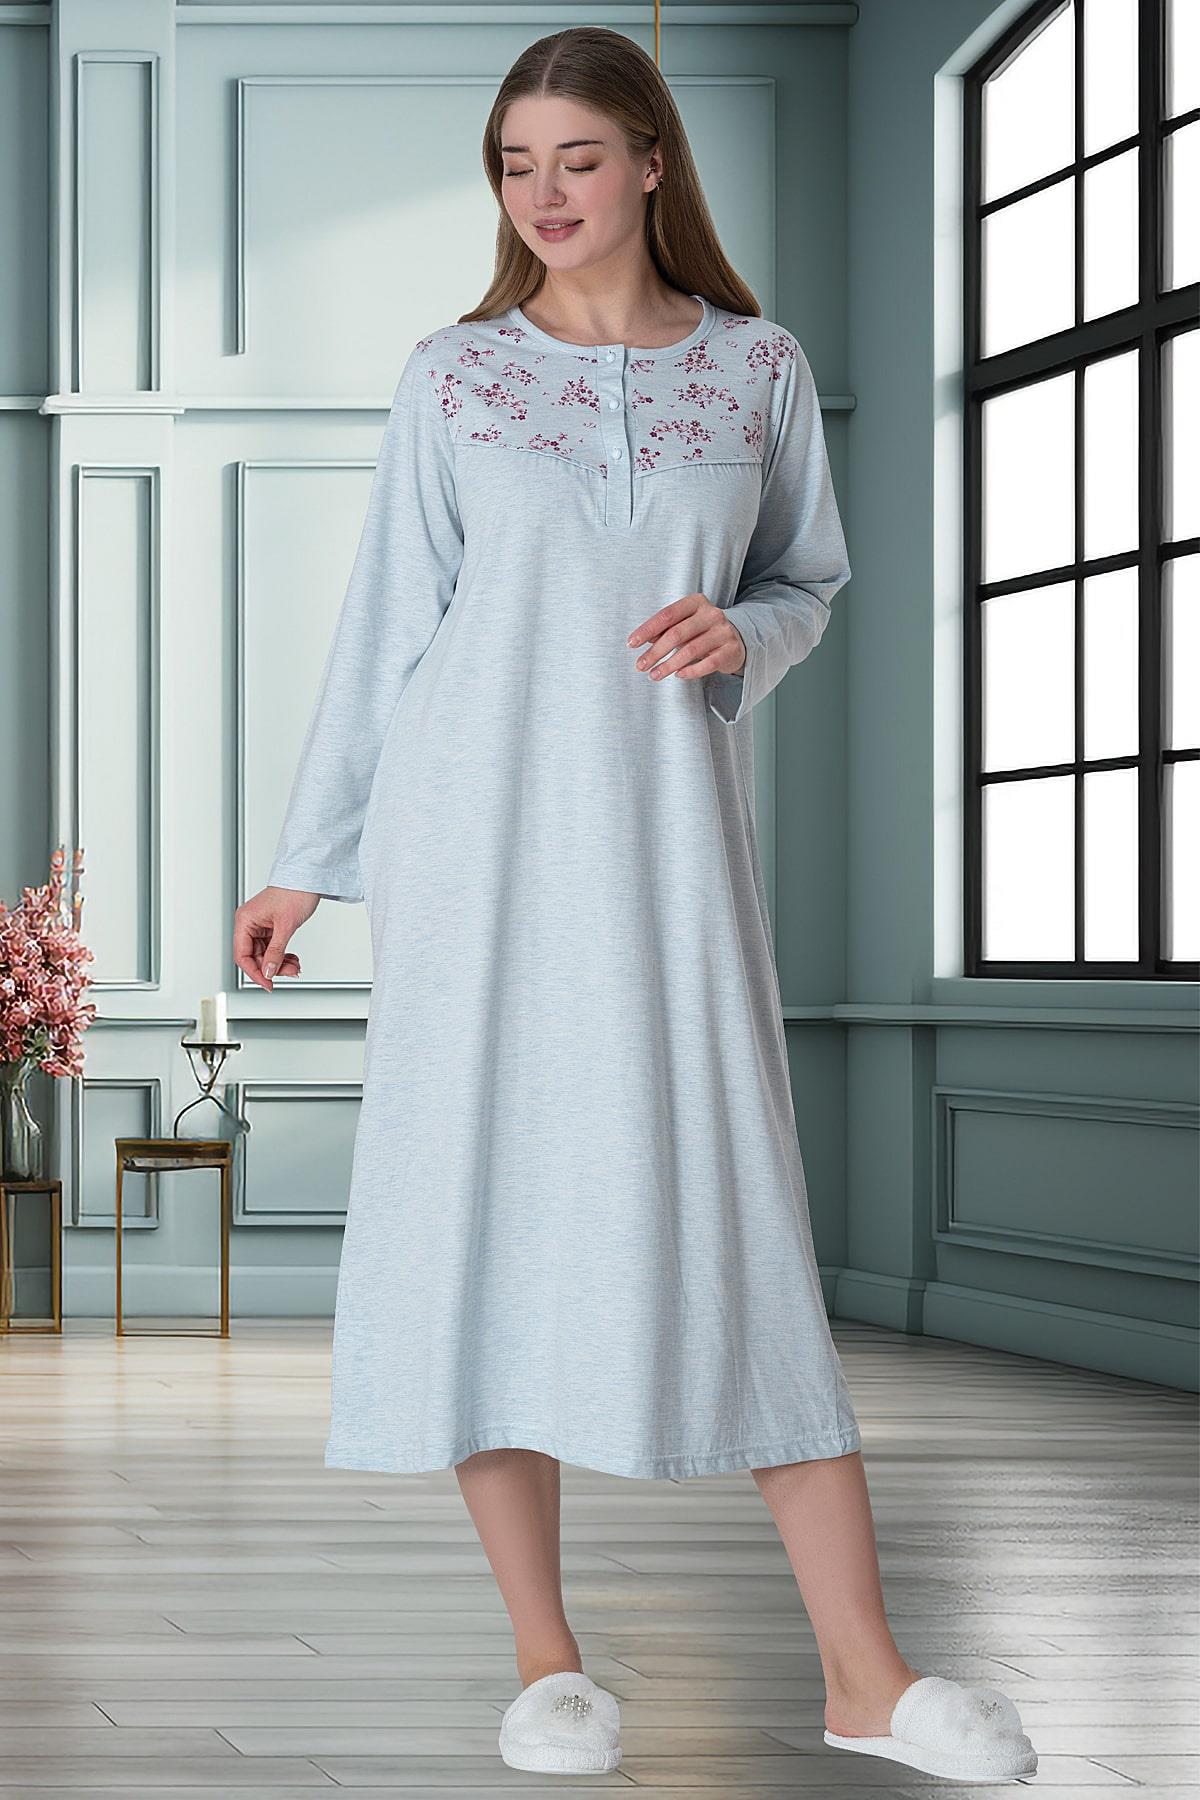 Shopymommy 6026 Patterned Plus Size Maternity & Nursing Nightgown Blue